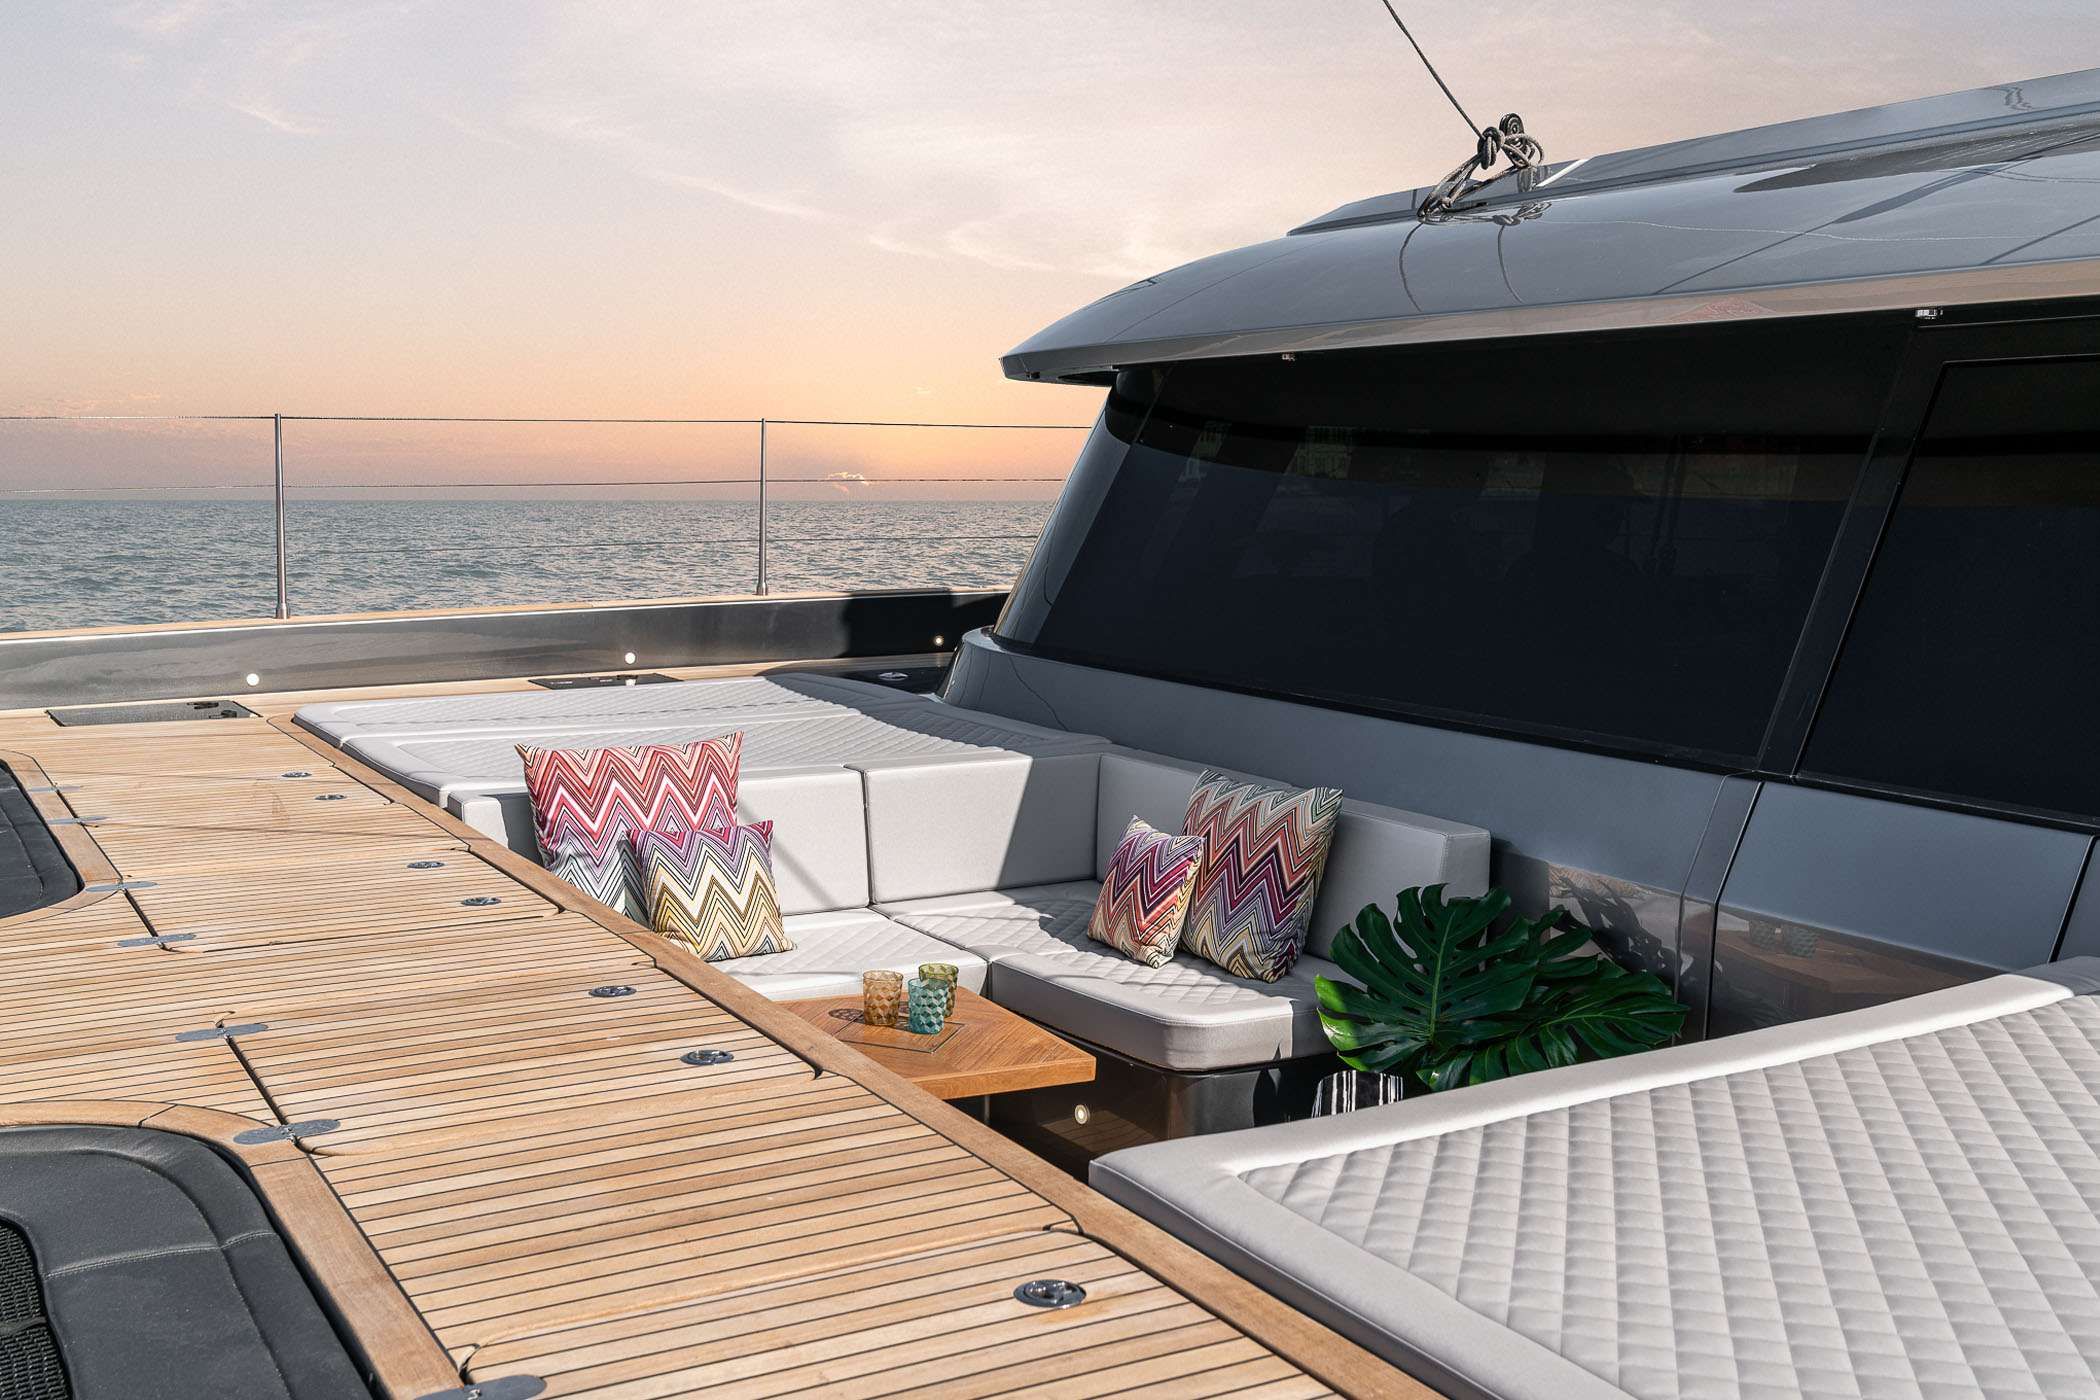 Foredeck Lounge Area